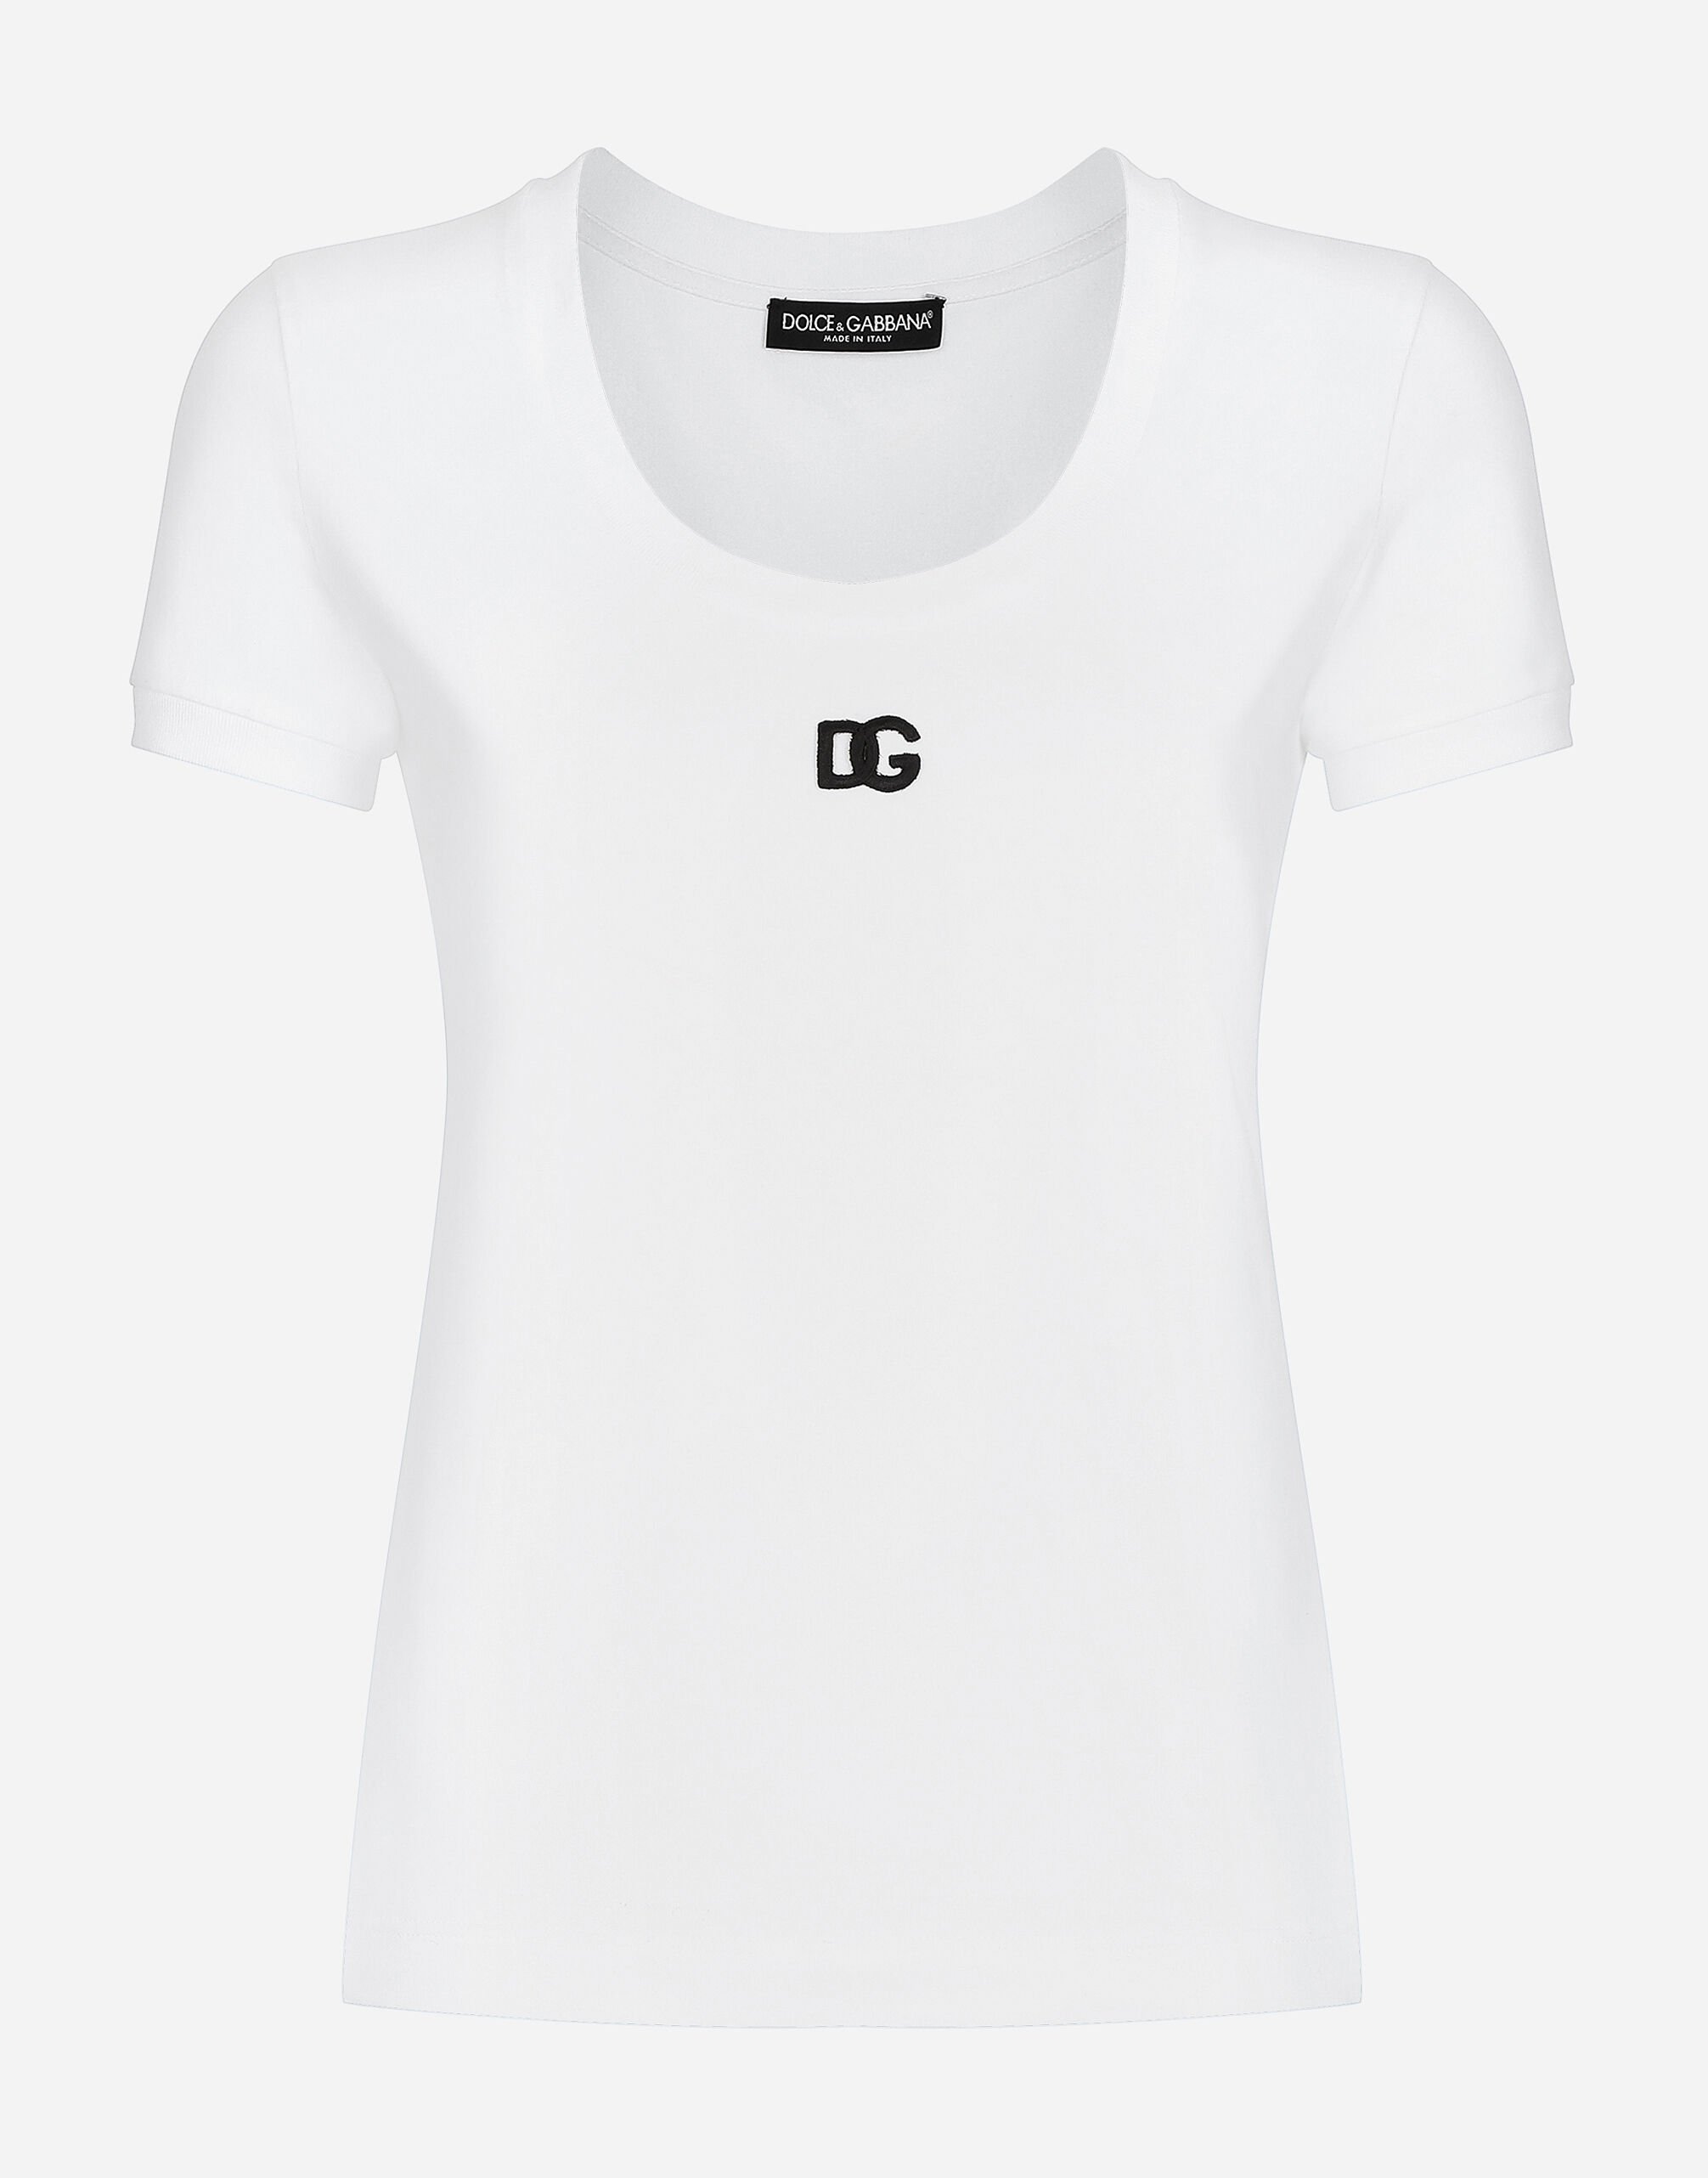 Jersey T-shirt with DG logo in White for Women | Dolce&Gabbana®